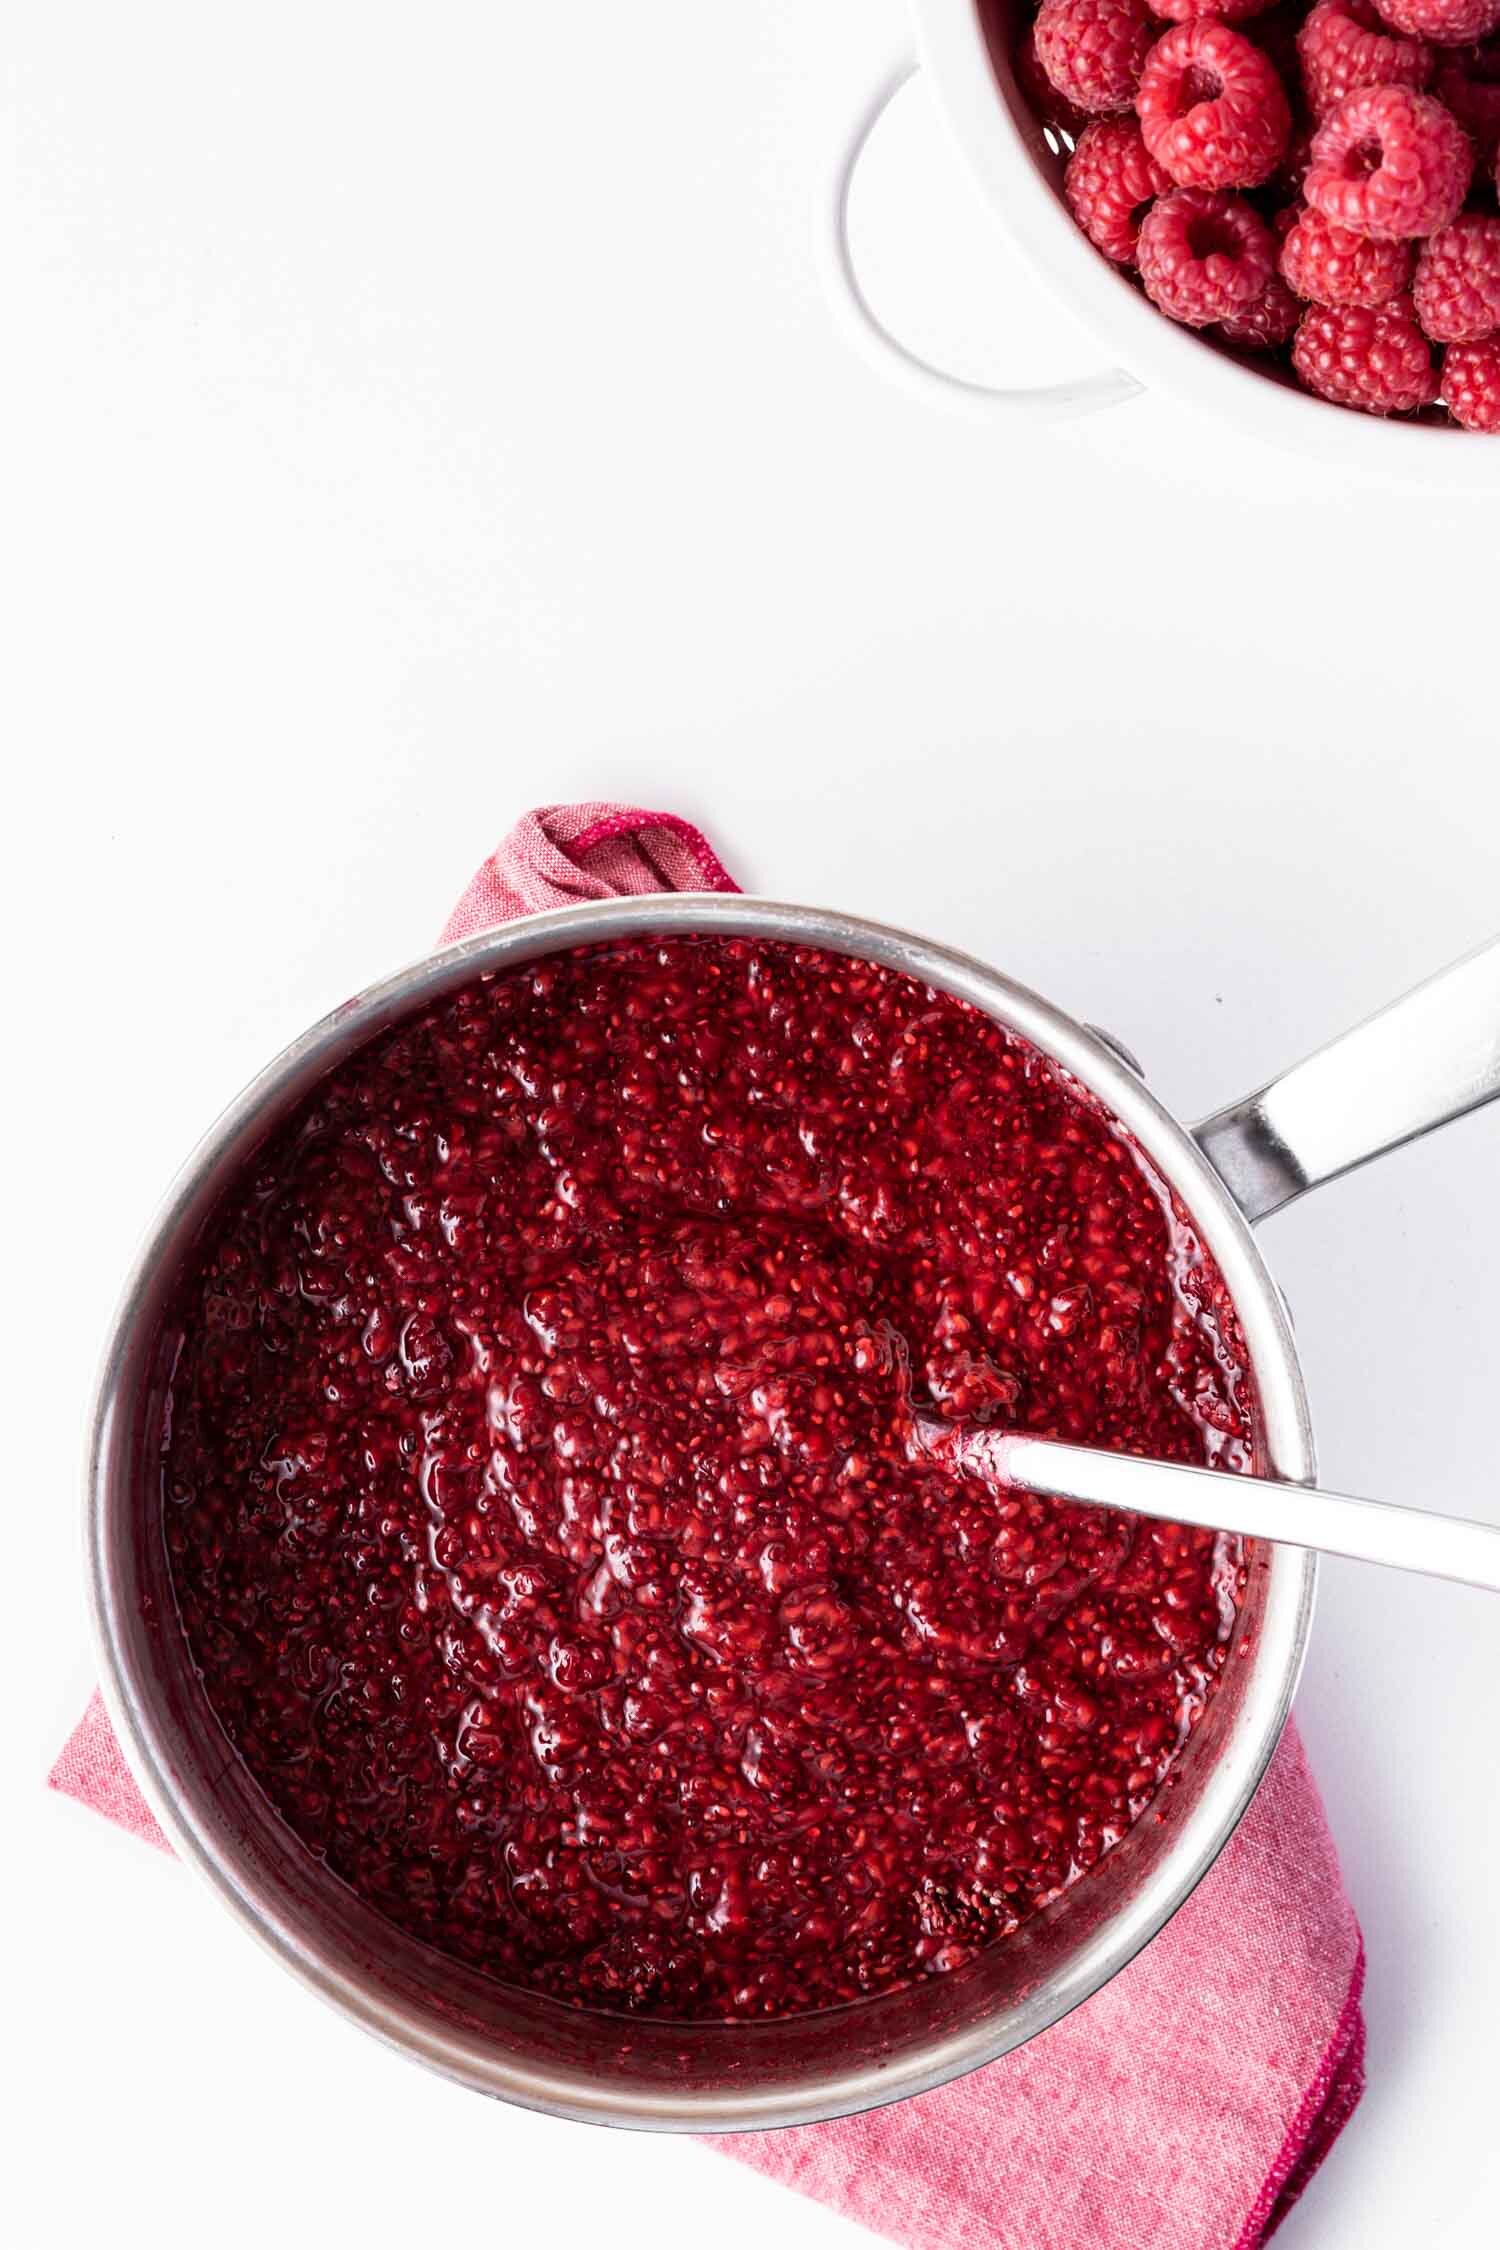 Raspberry Chia Jam, Raw or Cooked Recipe by Kari of Beautiful Ingredient. Two versions to enjoy in different ways, using the same ingredients. Nutrient-packed, refined sugar-free, and super quick &amp; easy. #rawveganrecipes #chiajam #raspberry #rawchiajam #rawveganjam #recipe #veganrecipe #recipesugarfree #sugarfreejam #jamrecipeseasy #jam #berry